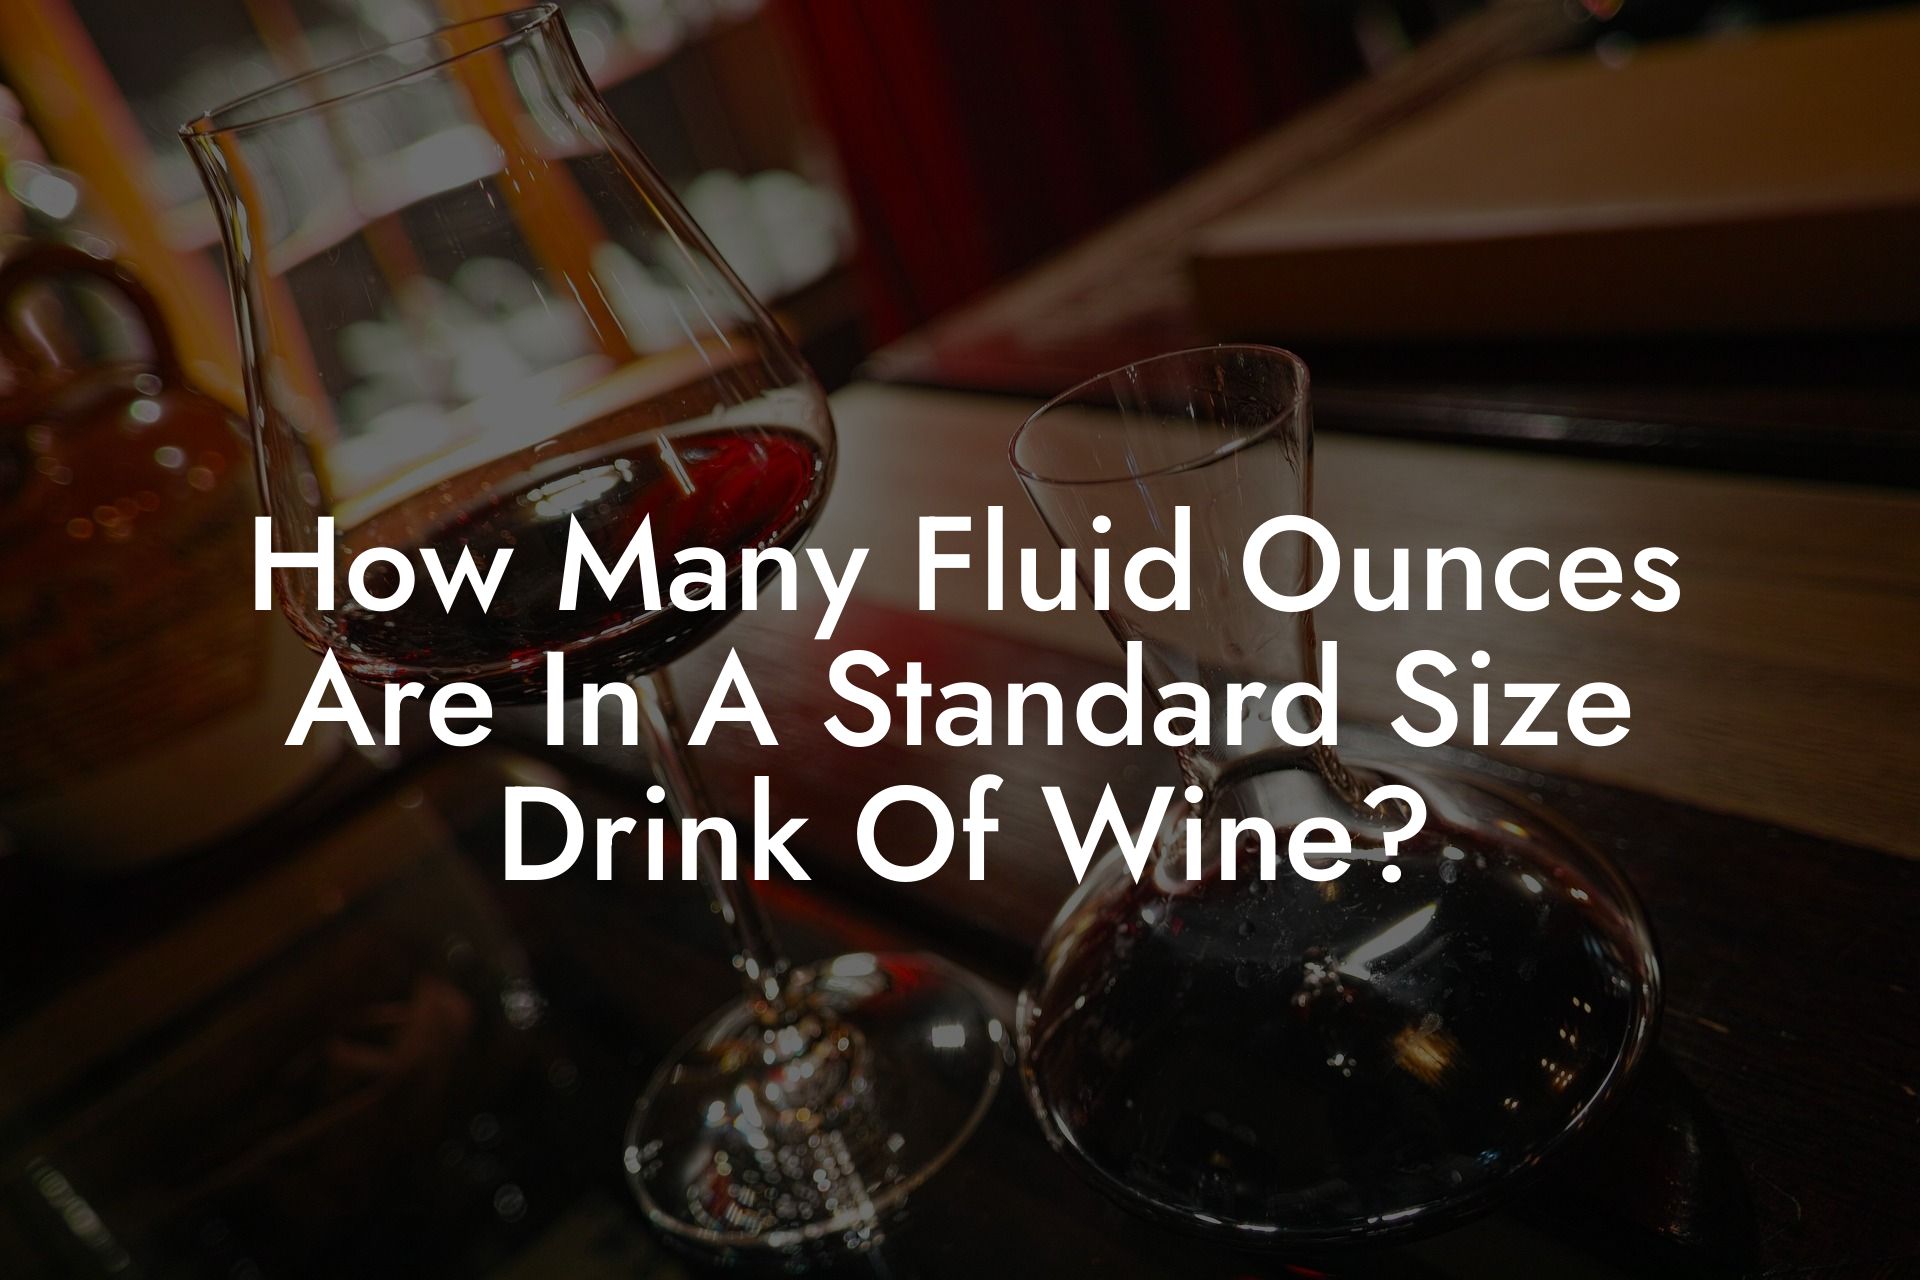 How Many Fluid Ounces Are In A Standard Size Drink Of Wine?